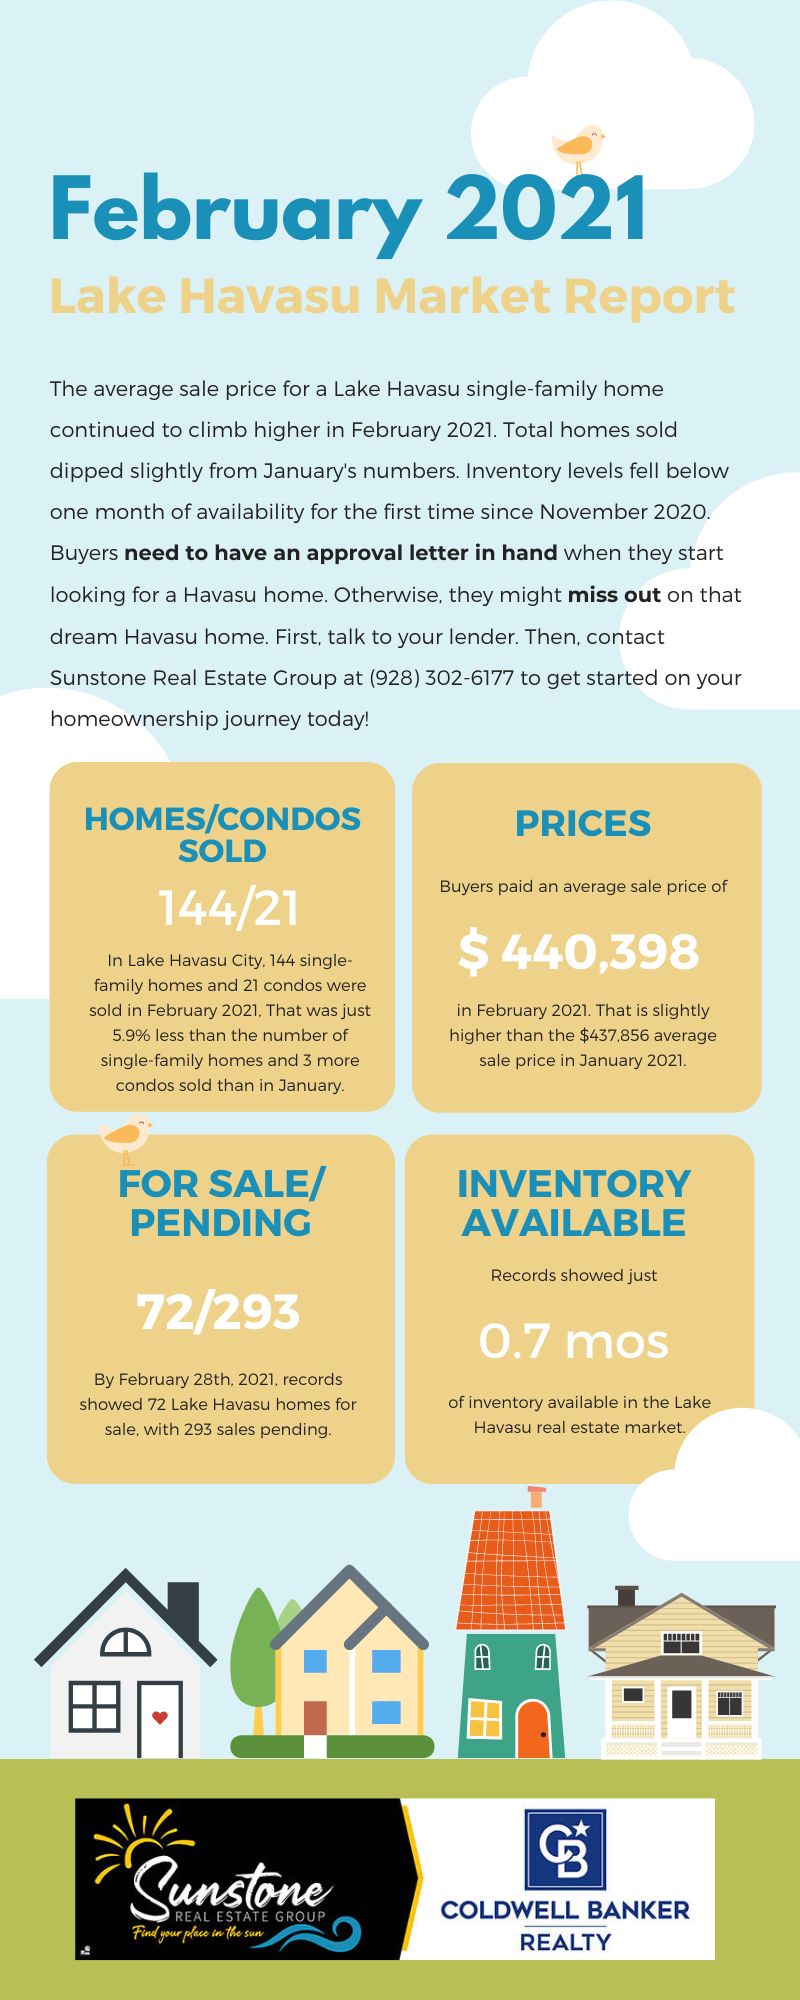 Havasu's seller's market just got a little tighter, according to the Lake Havasu Market Report for February 2021. Inventory hit below one month availability. Prices rose yet again. You need to start pre-approval proceedings with your lender ASAP to be ready to submit an offer when you find a home you love.